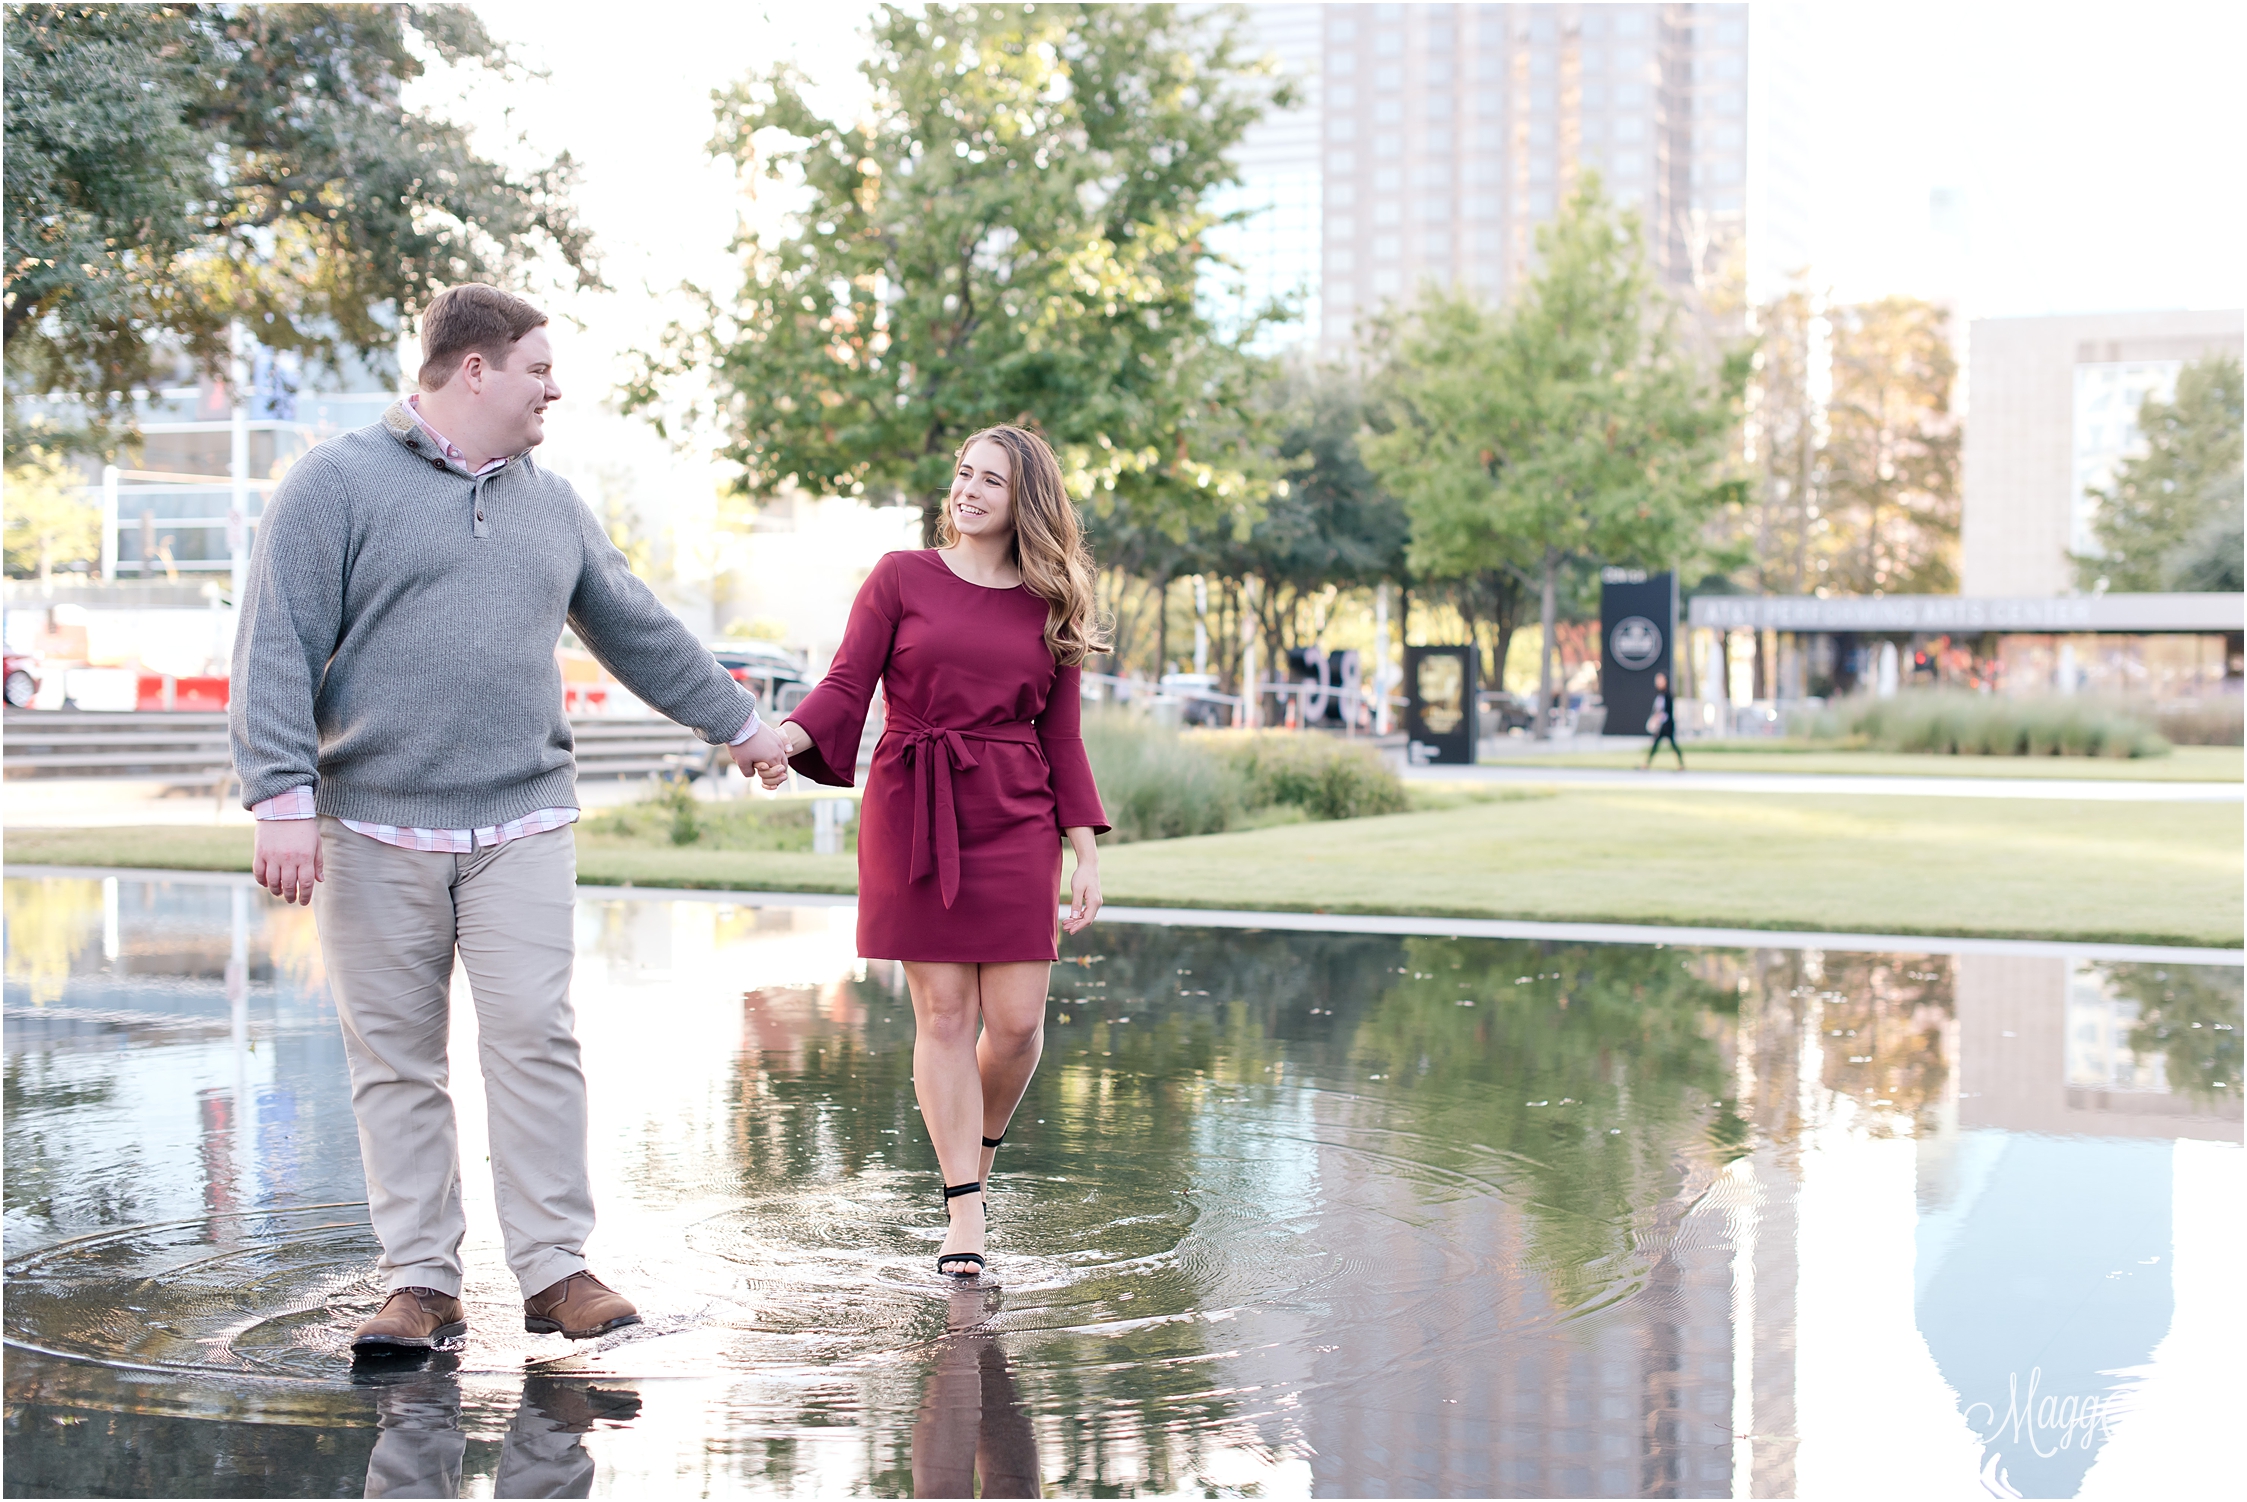 Love, Professional Photographer, Professional Photography, Winspear Opera House, Engagements, Couple, Bride and Groom, Dallas, MaggShots Photography, MaggShots